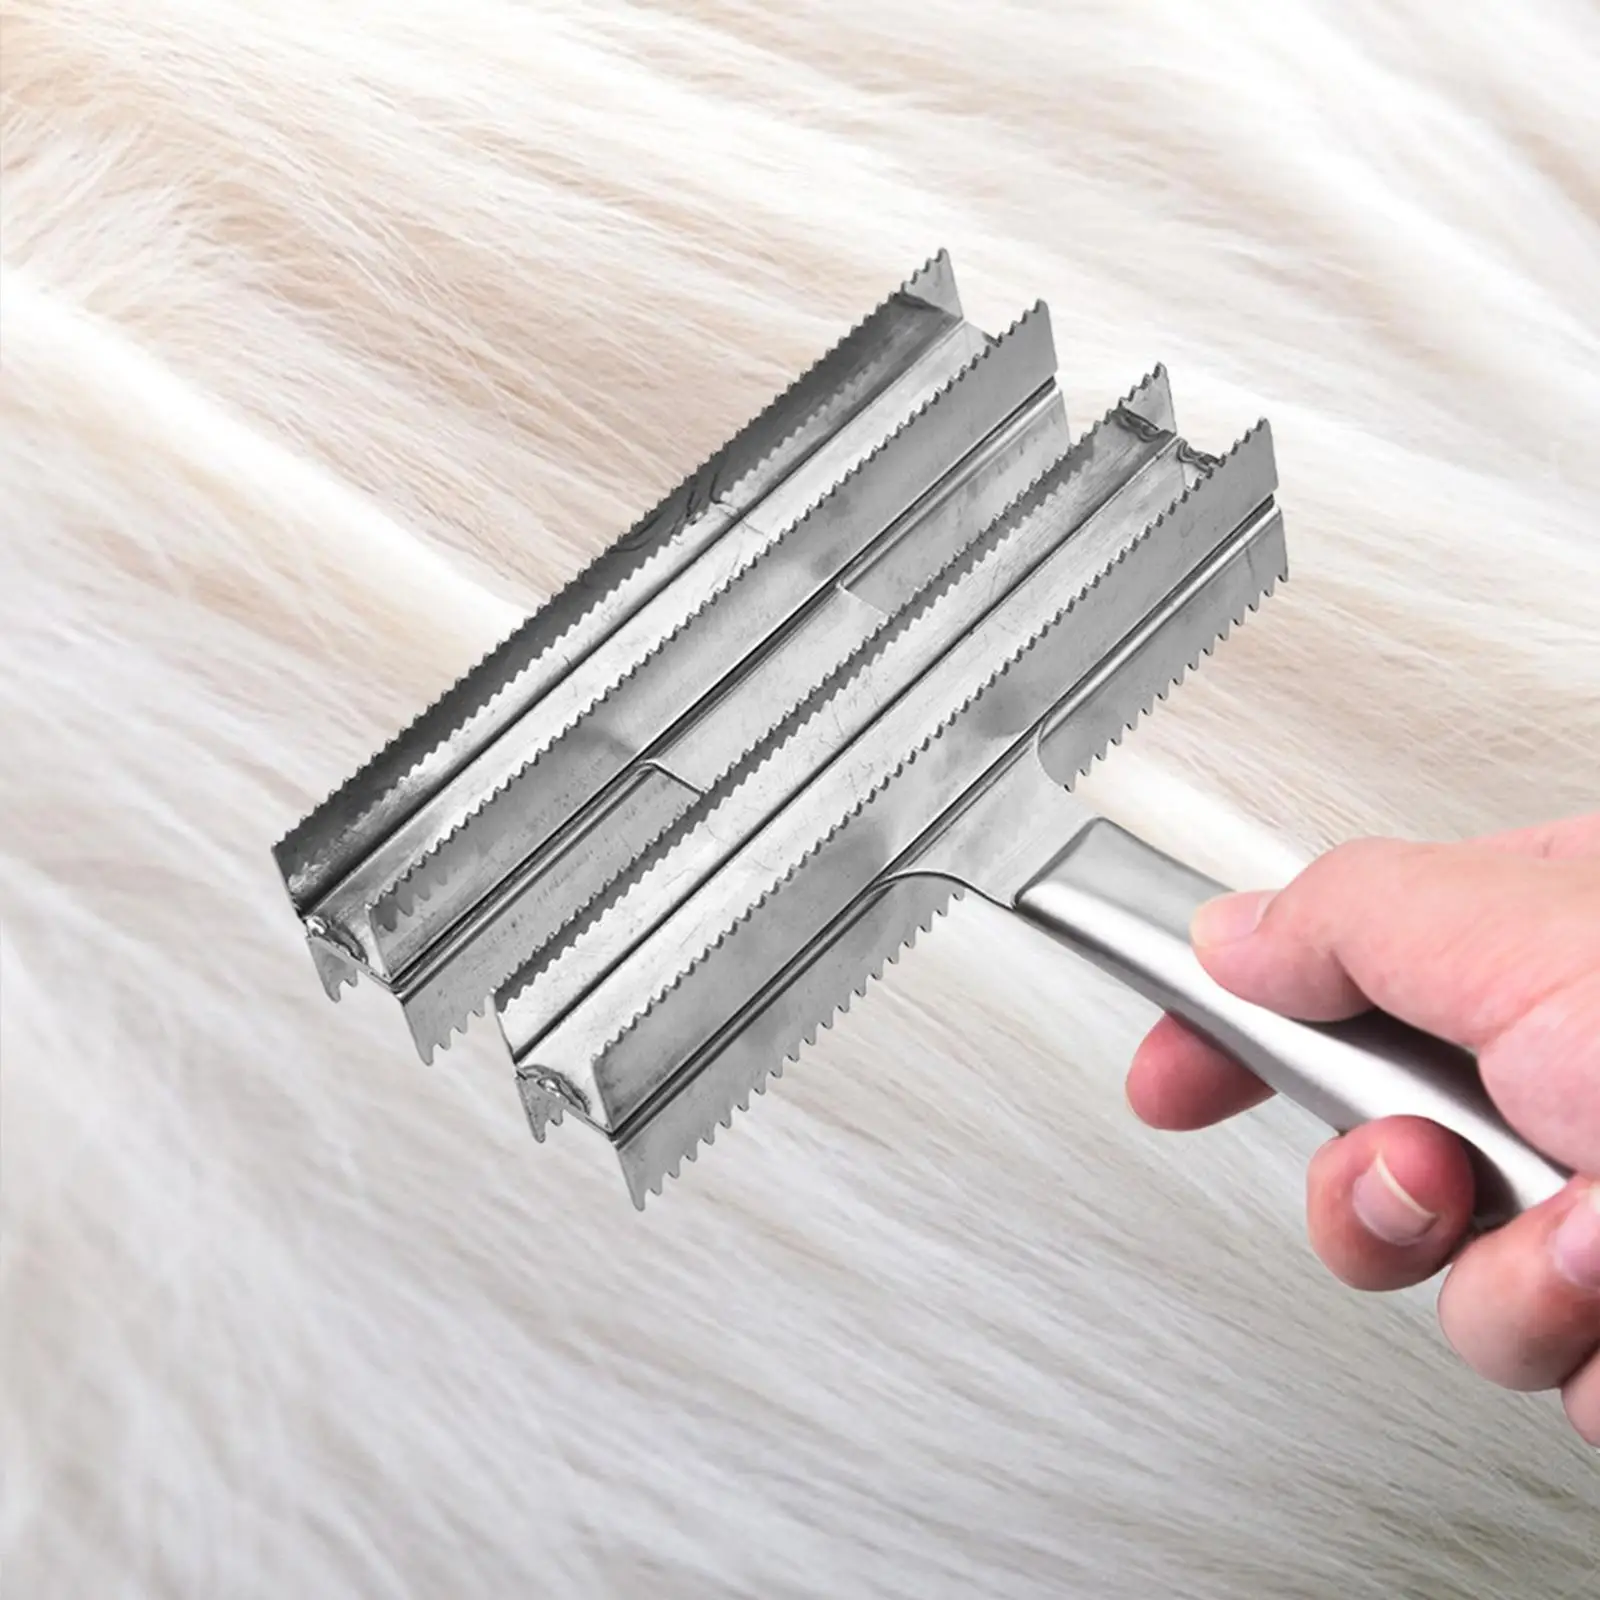 Pet Rake Comb Brush Metal Shedding Blade Grooming Care Tool Portable Horse Brush Comb for Donkeys Cows Animal Livestock All Dogs